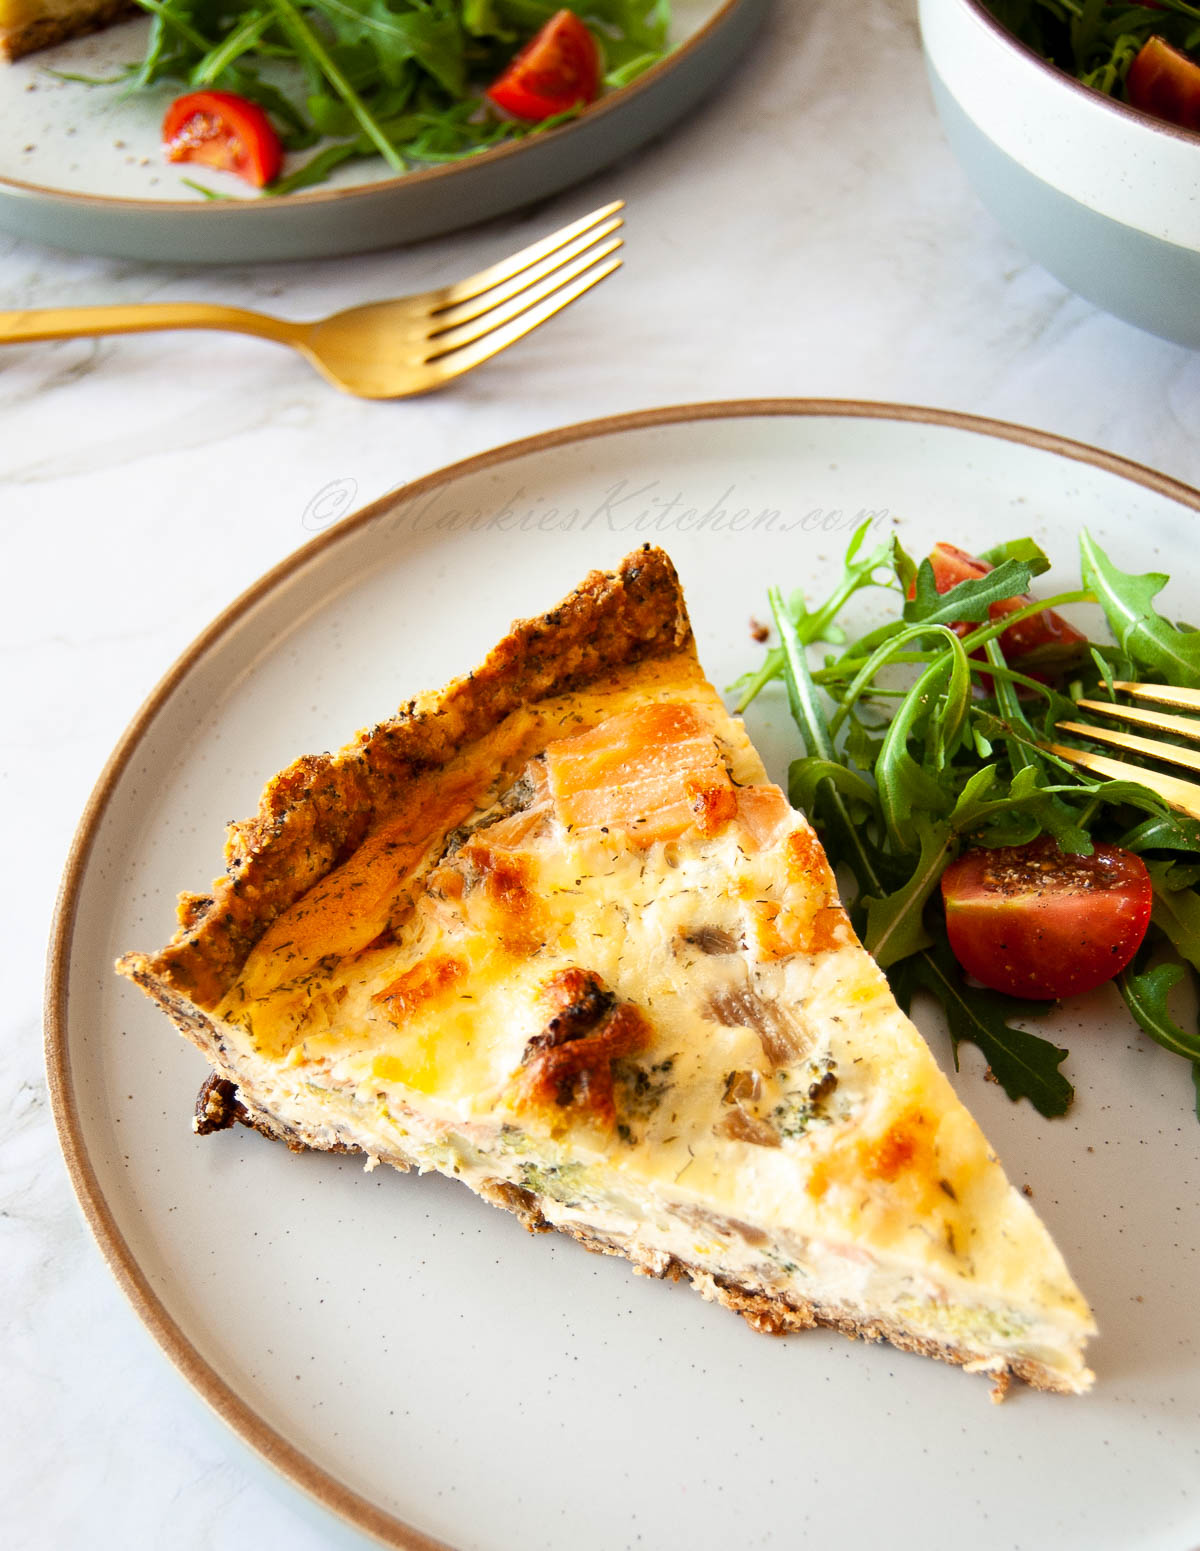 A photo of a portions of quiche and a salad on a plate.